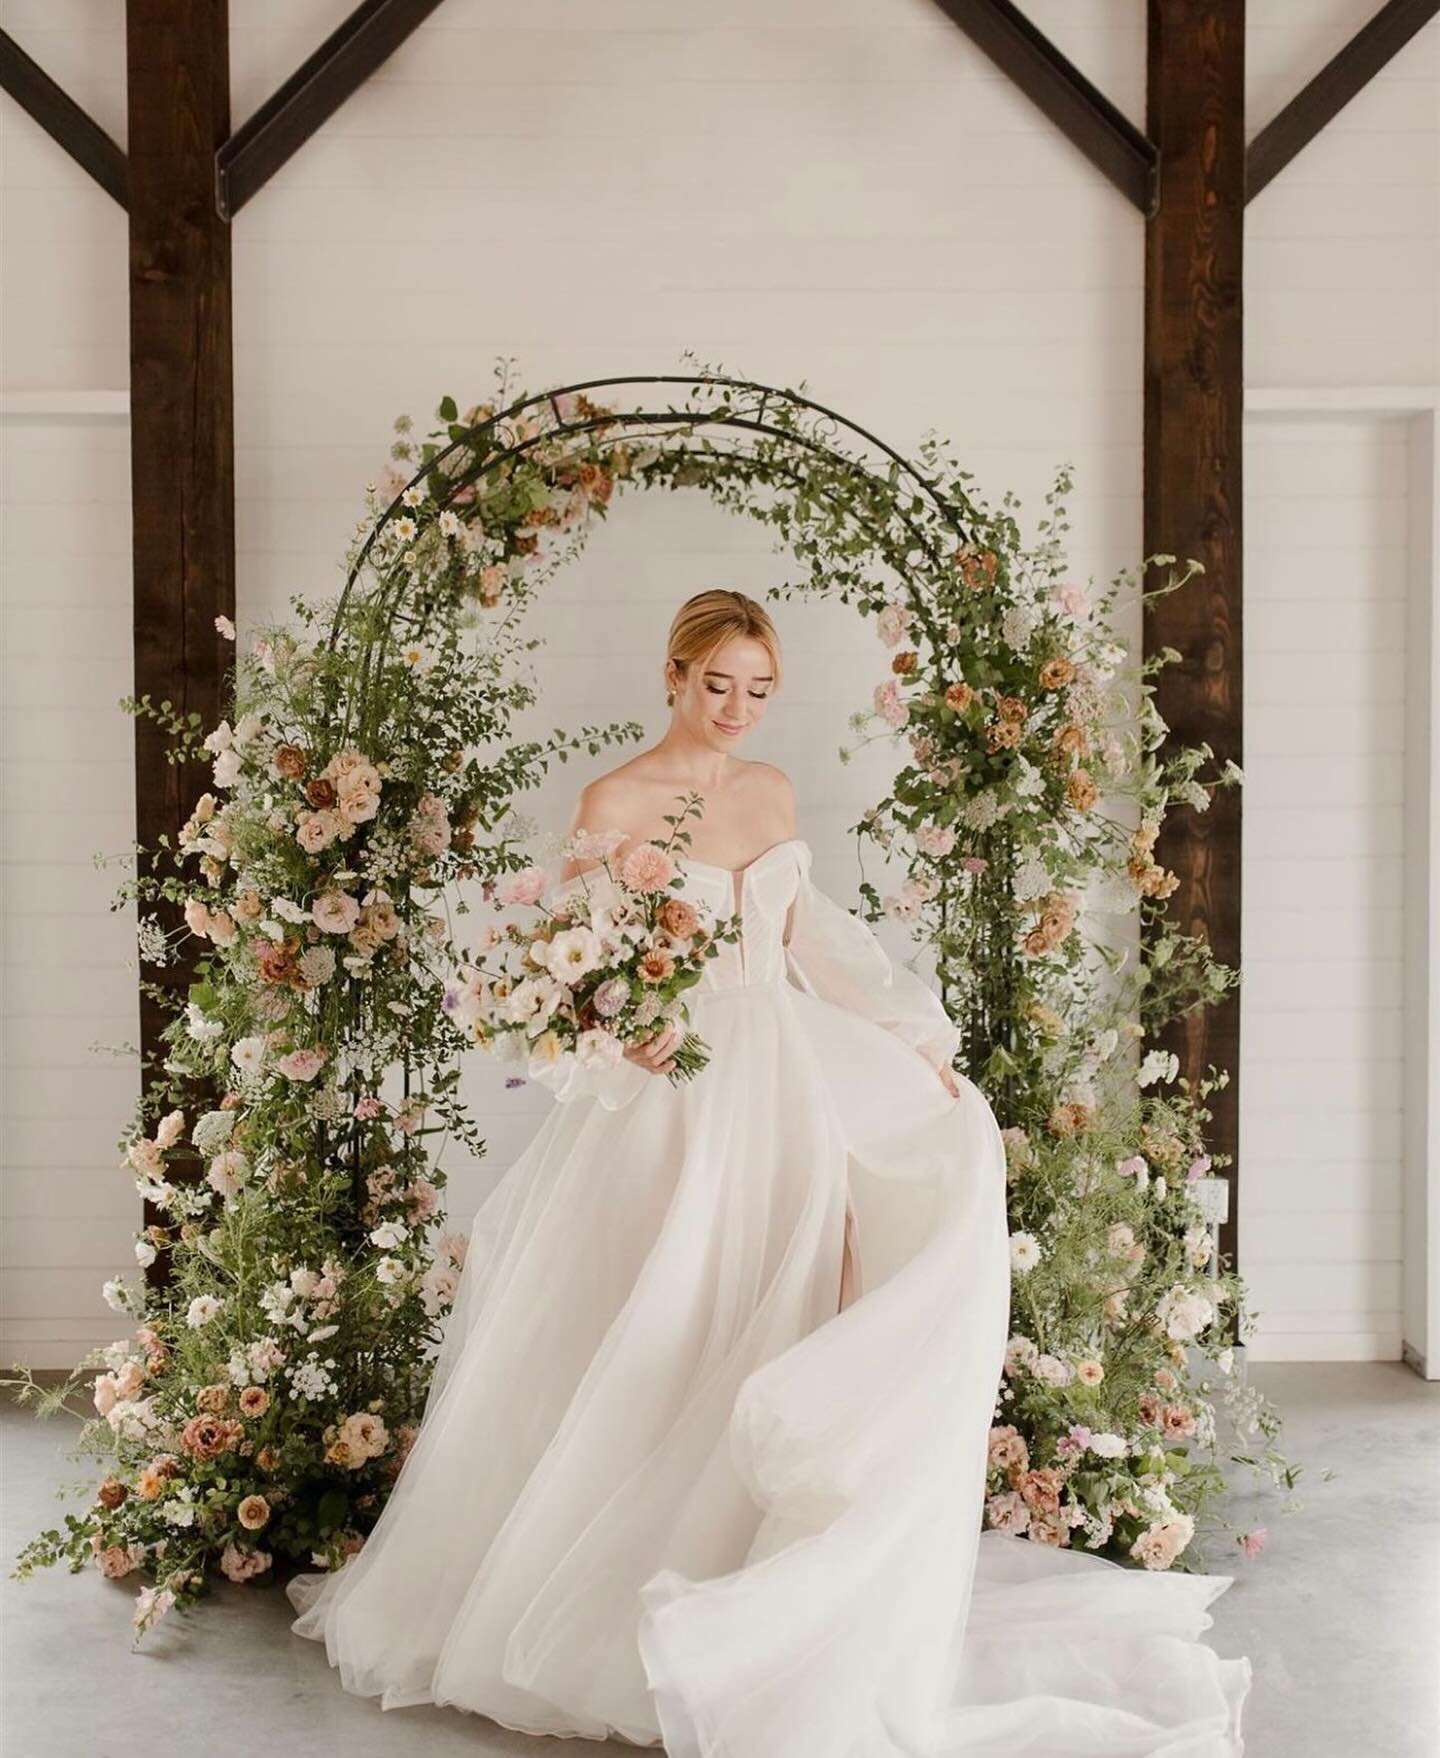 The start of spring has us dreaming of spring weddings and colourful florals. 🌷

Gown: @martinalianabridal 
Design &amp; Planning: @kaylalagosweddings
Photography: @vanessarenaae
Venue &amp; florals: @lilystonegardens
Makeup: @alanaveertbeauty
Tux: 